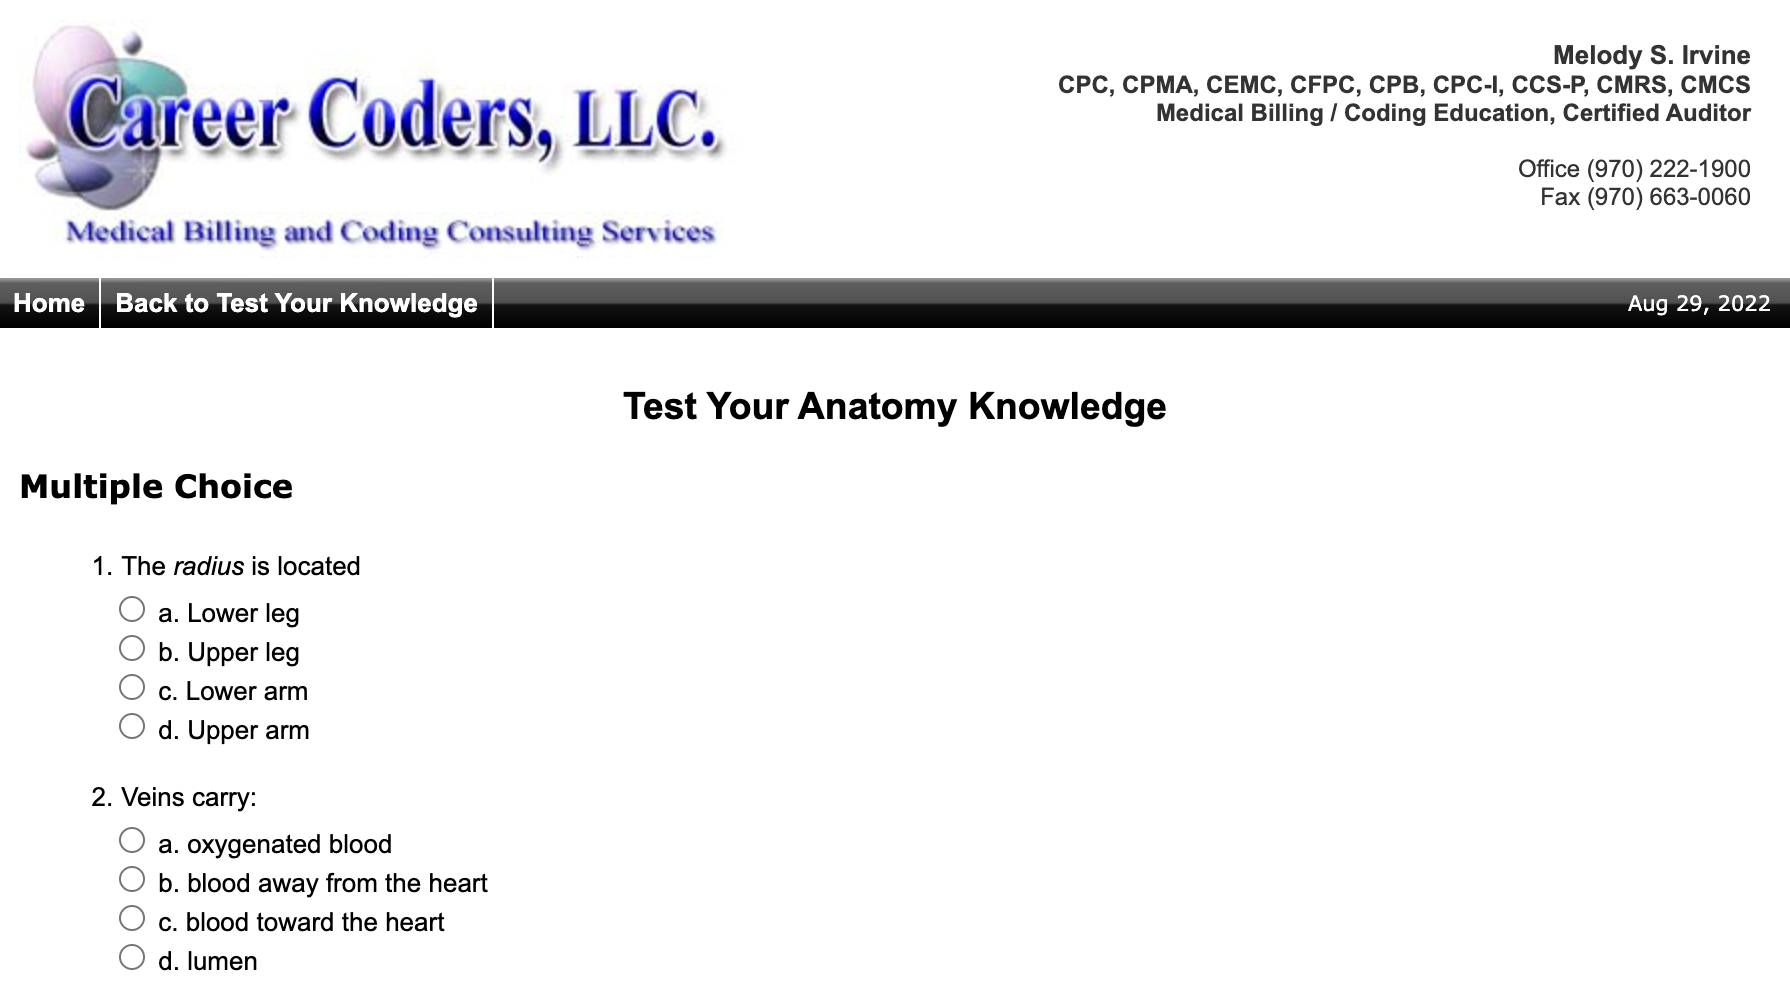 CareerCoders.com is a test bank of 100+  CPC practice questions created by their staff of certified medical billers and coders.